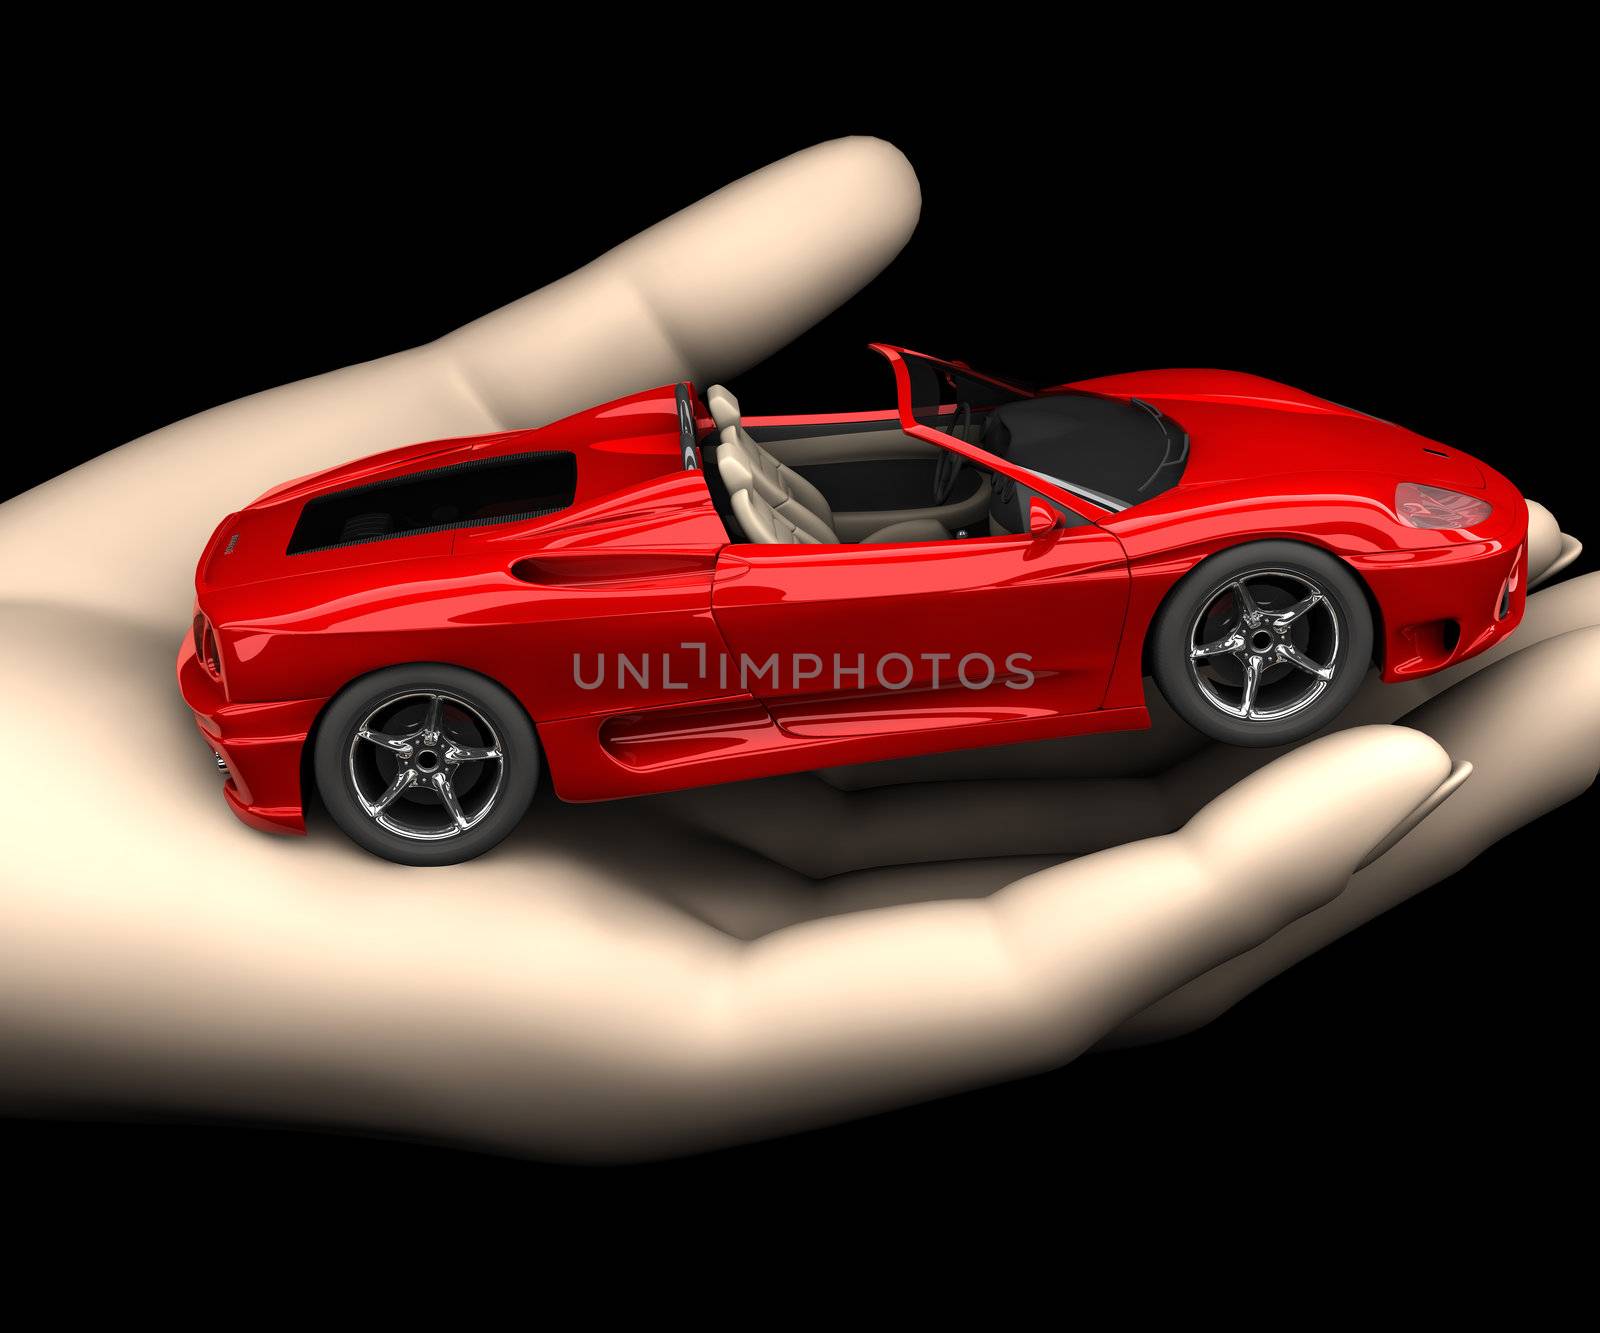 A little car in a hand